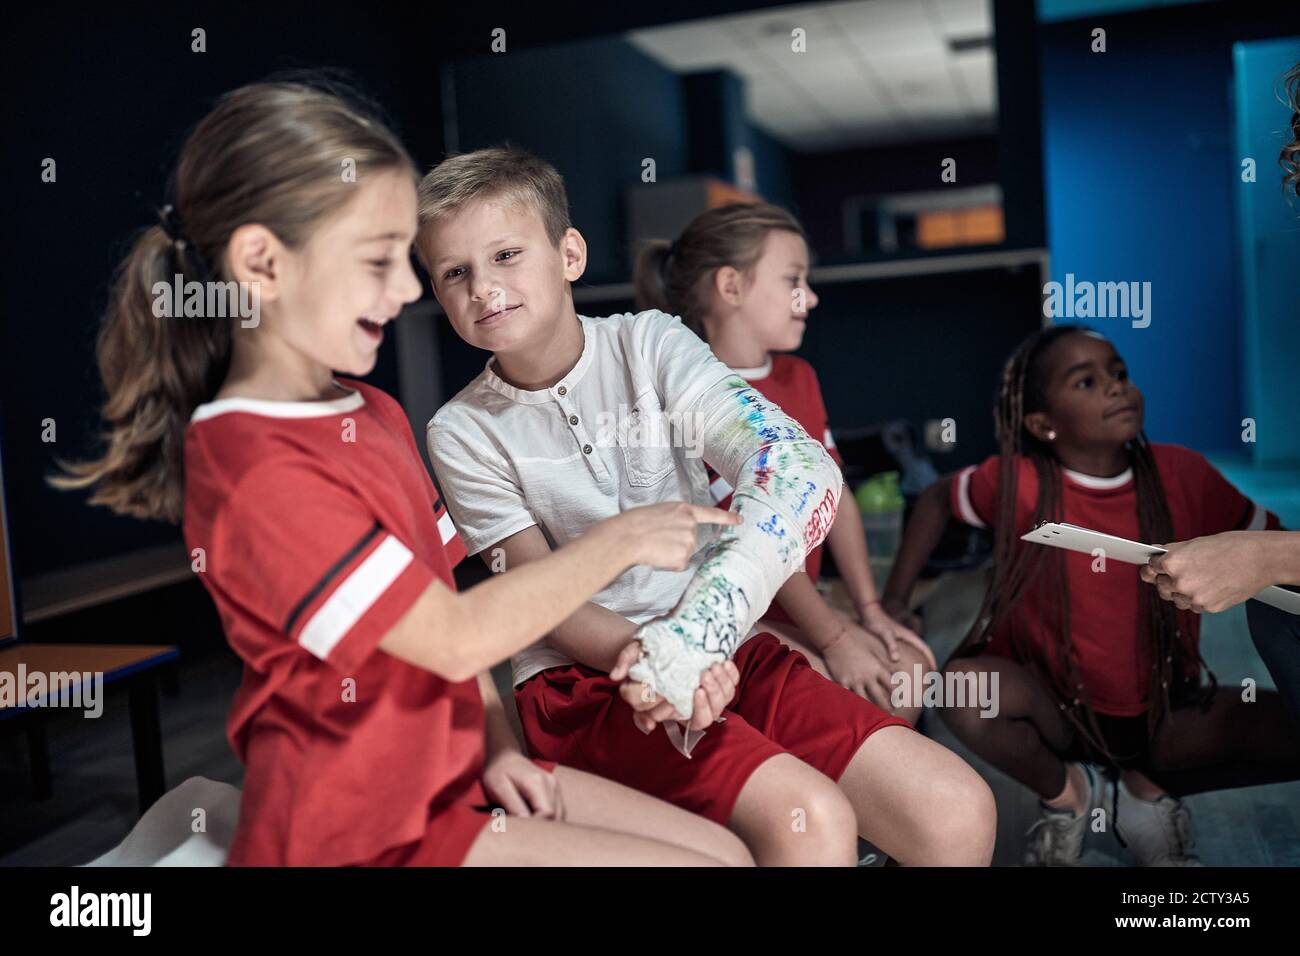 Injured a little soccer player and his team mates in a locker room Stock Photo